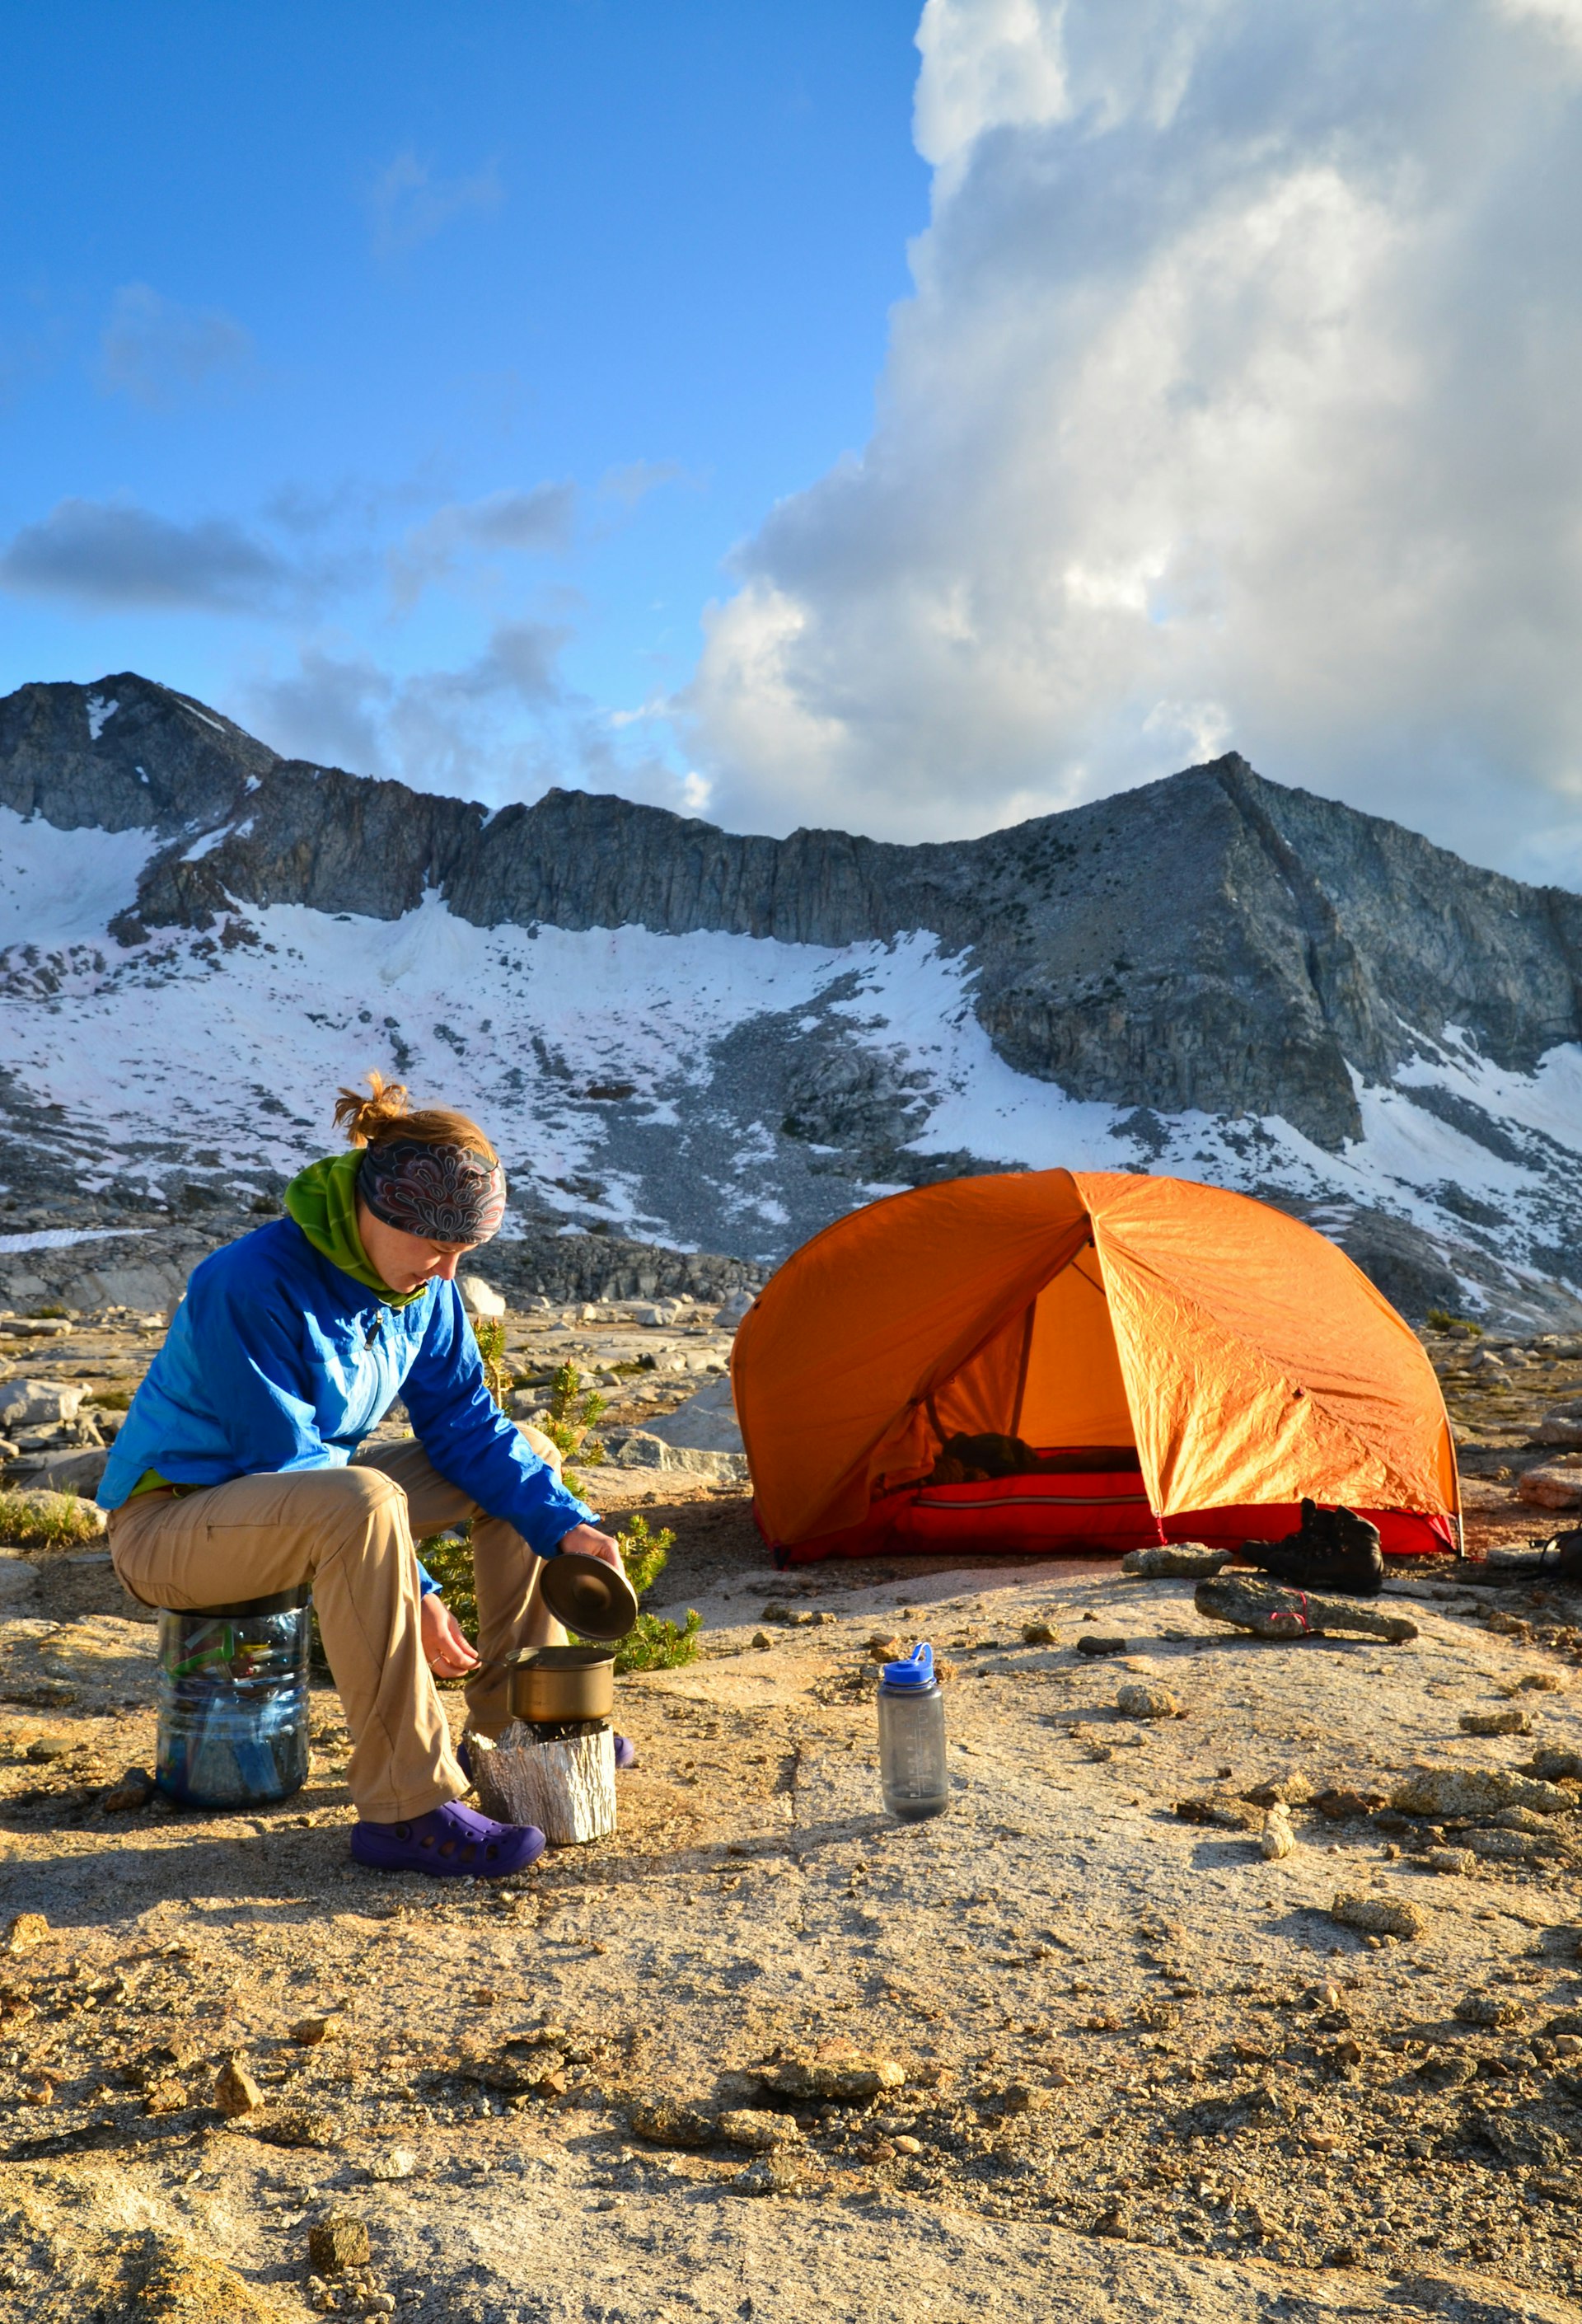 Woman sitting next to pitched tent at snow-capped Sierra Nevada